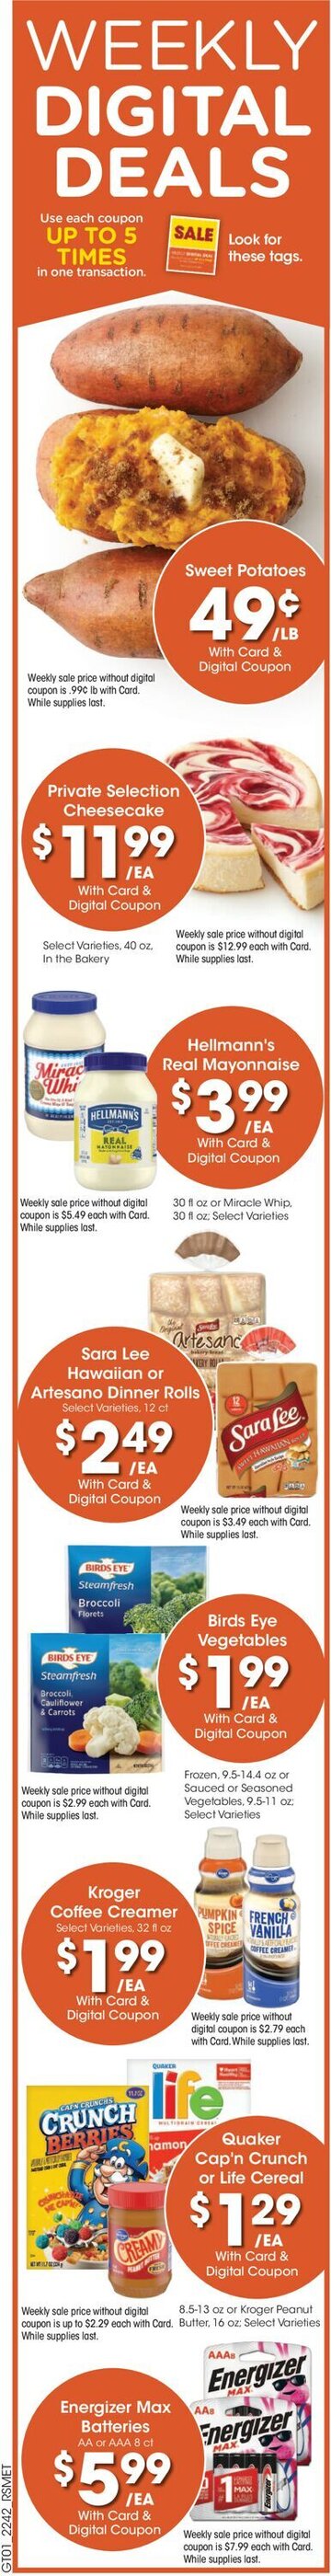 Pick n Save Weekly Ad Preview: (September 20 - September 26 2023)